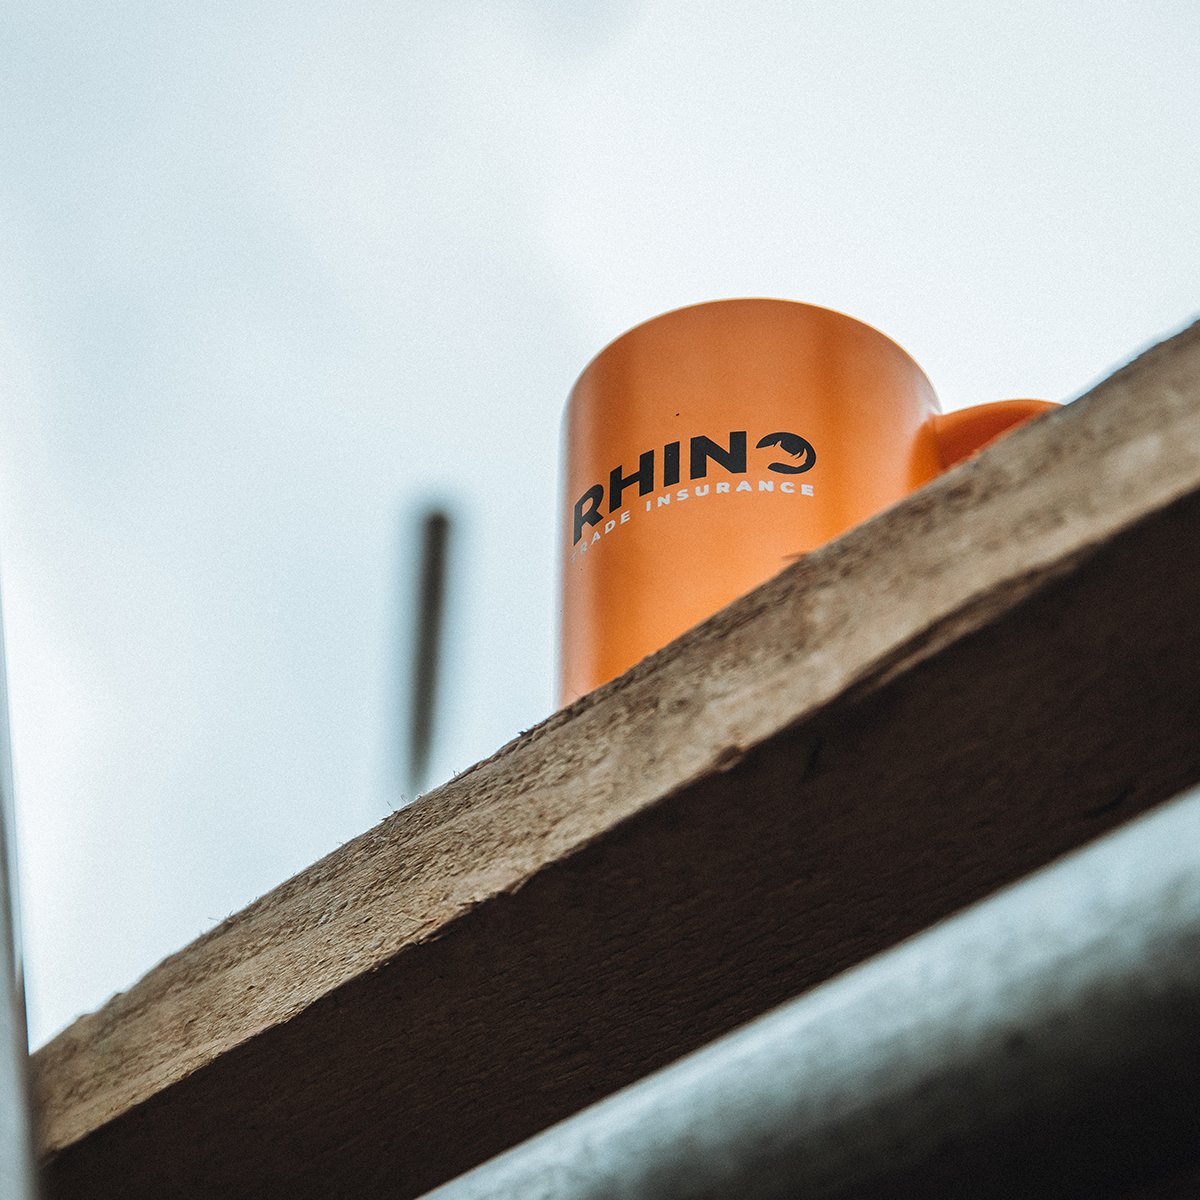 Things that just hit right: Rhino swag being spotted on a busy building site 👀🔥 rhinotradeinsurance.com/quote/ #tradespeople #buildingsite #tradeinsurance